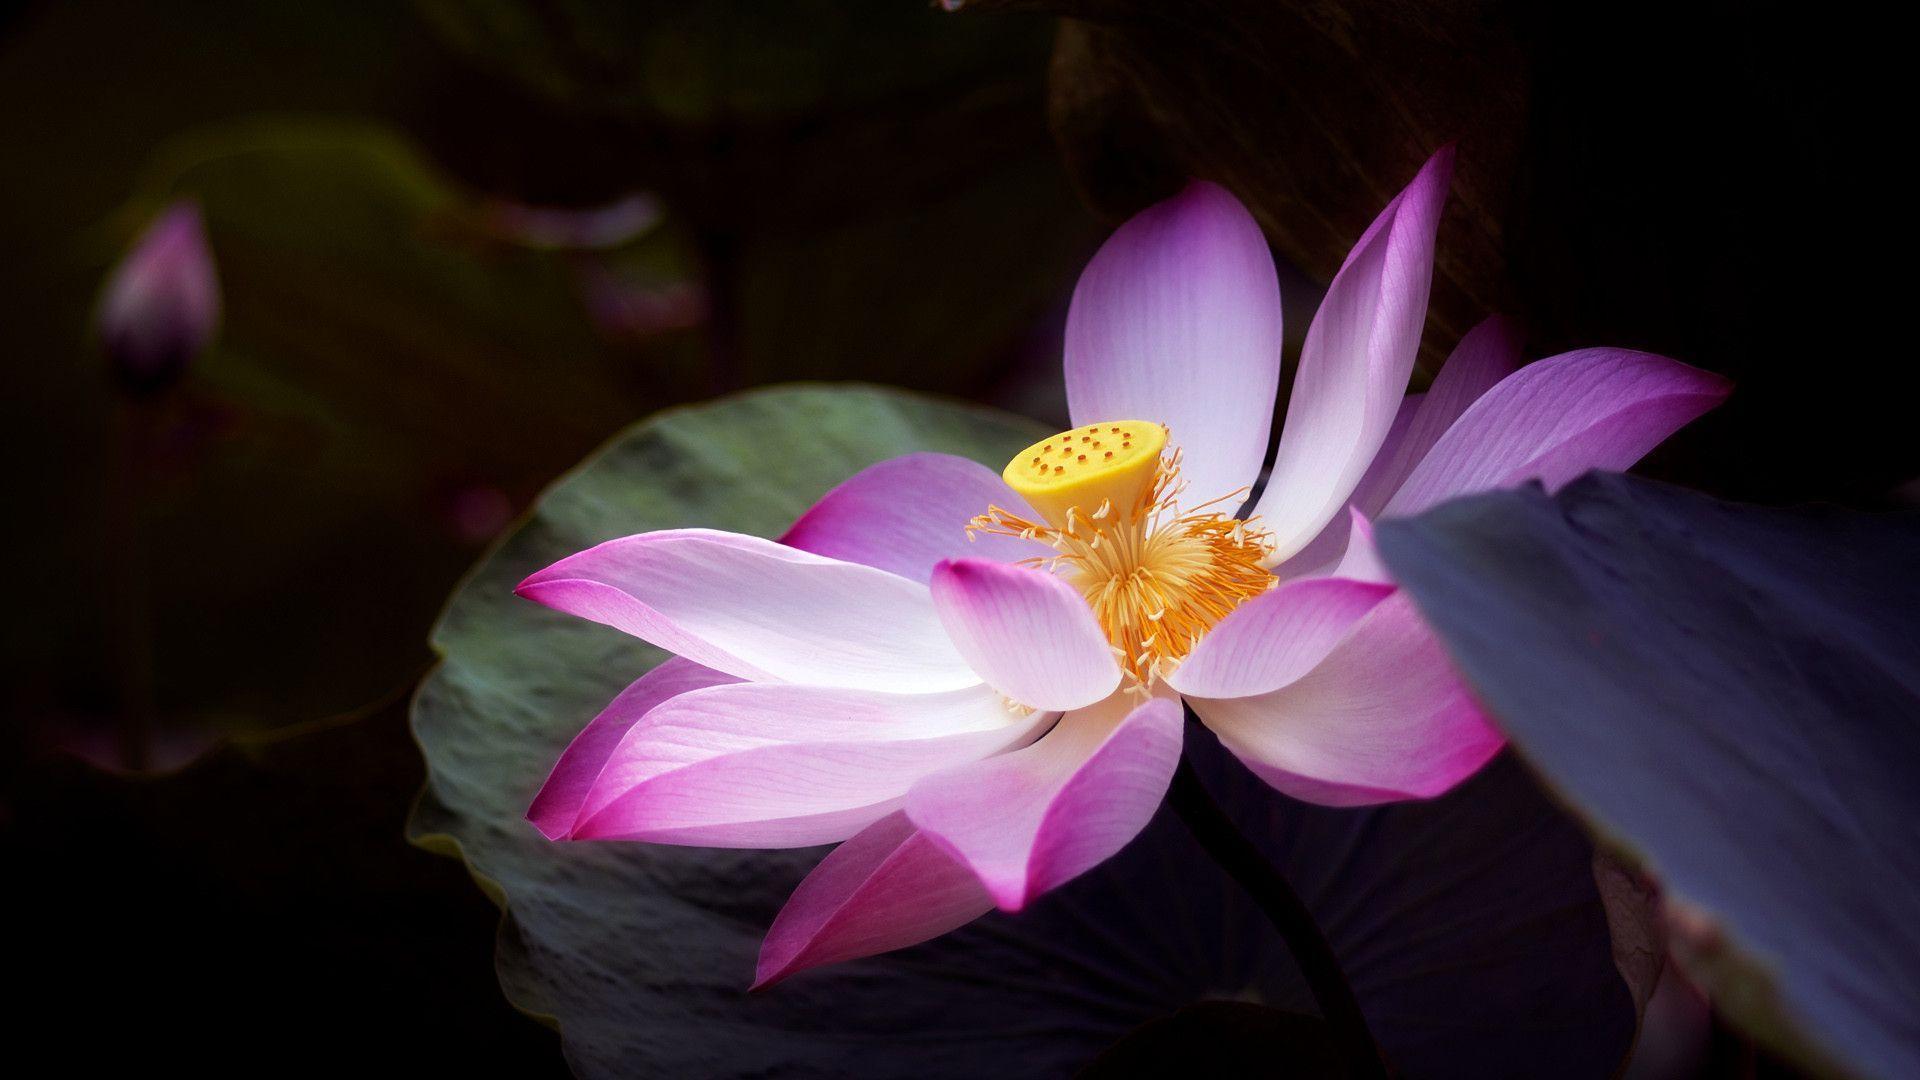 You Can Download The Lotus Flower Wallpaper (1920 X 1080 Px) Here